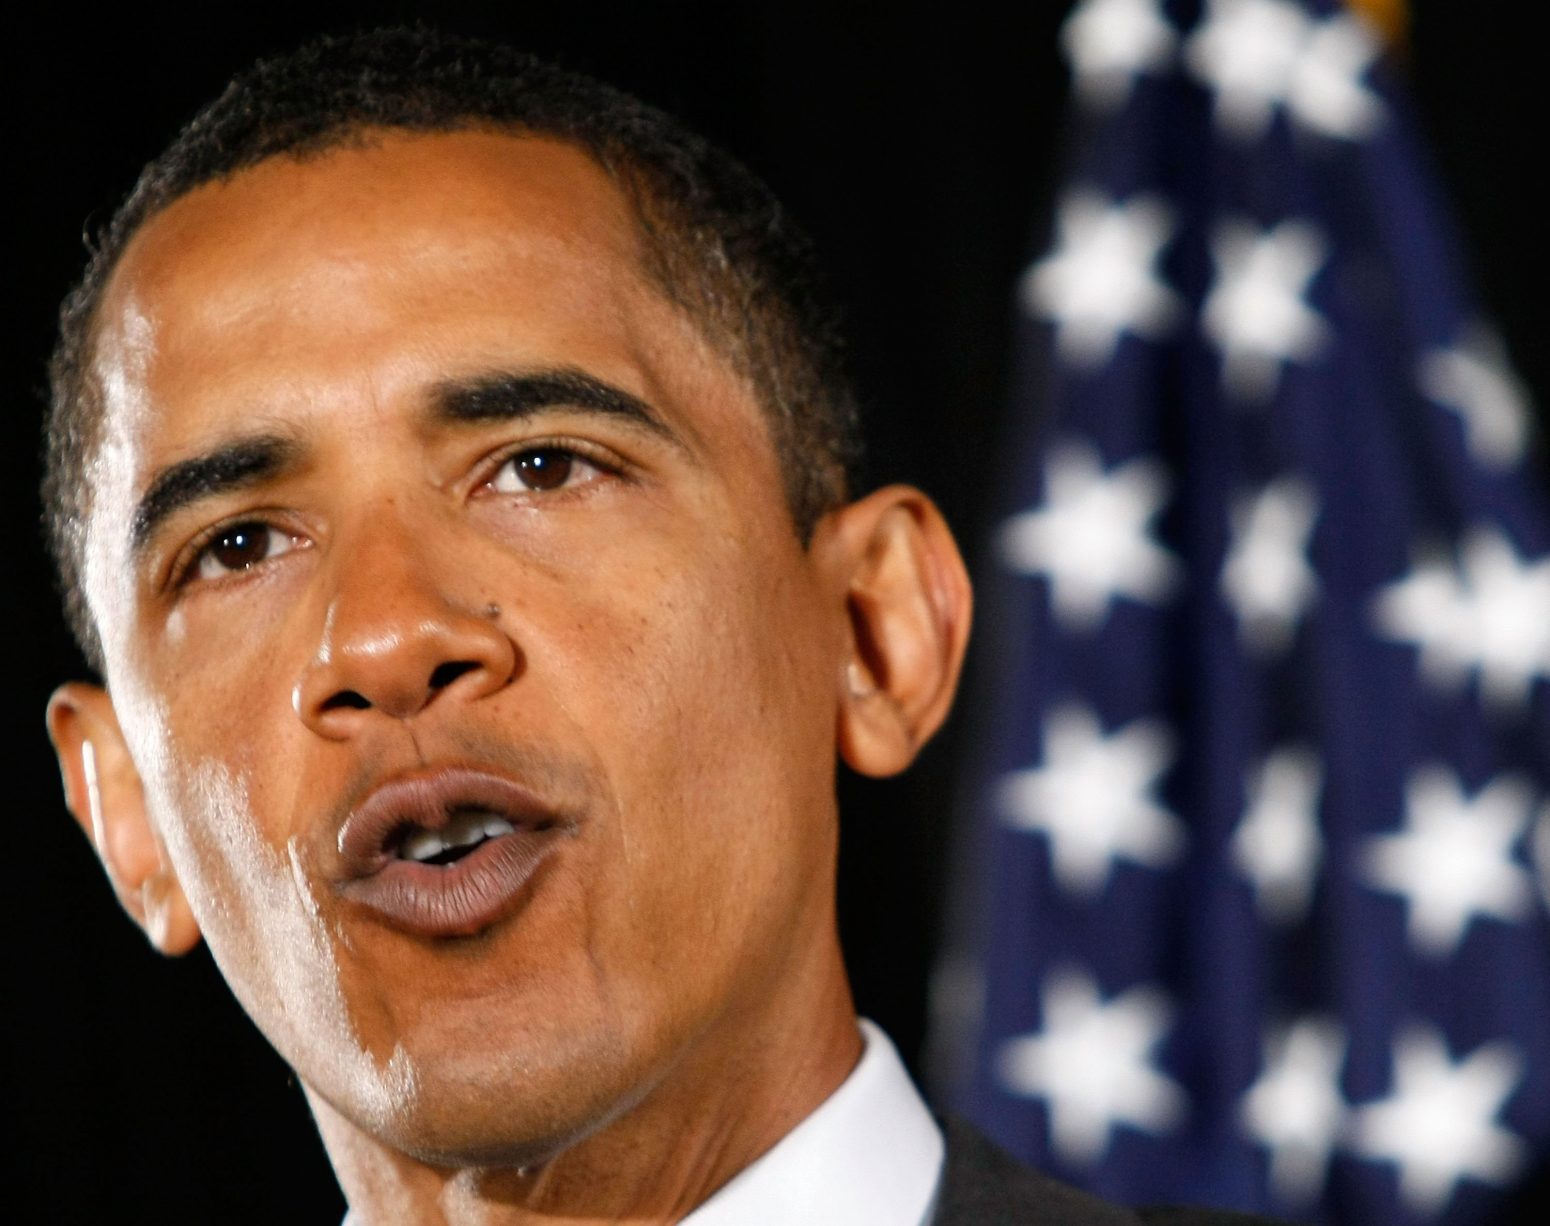 Obama on Mutallab U.S. intelligence flaws: 'buck stops with me'